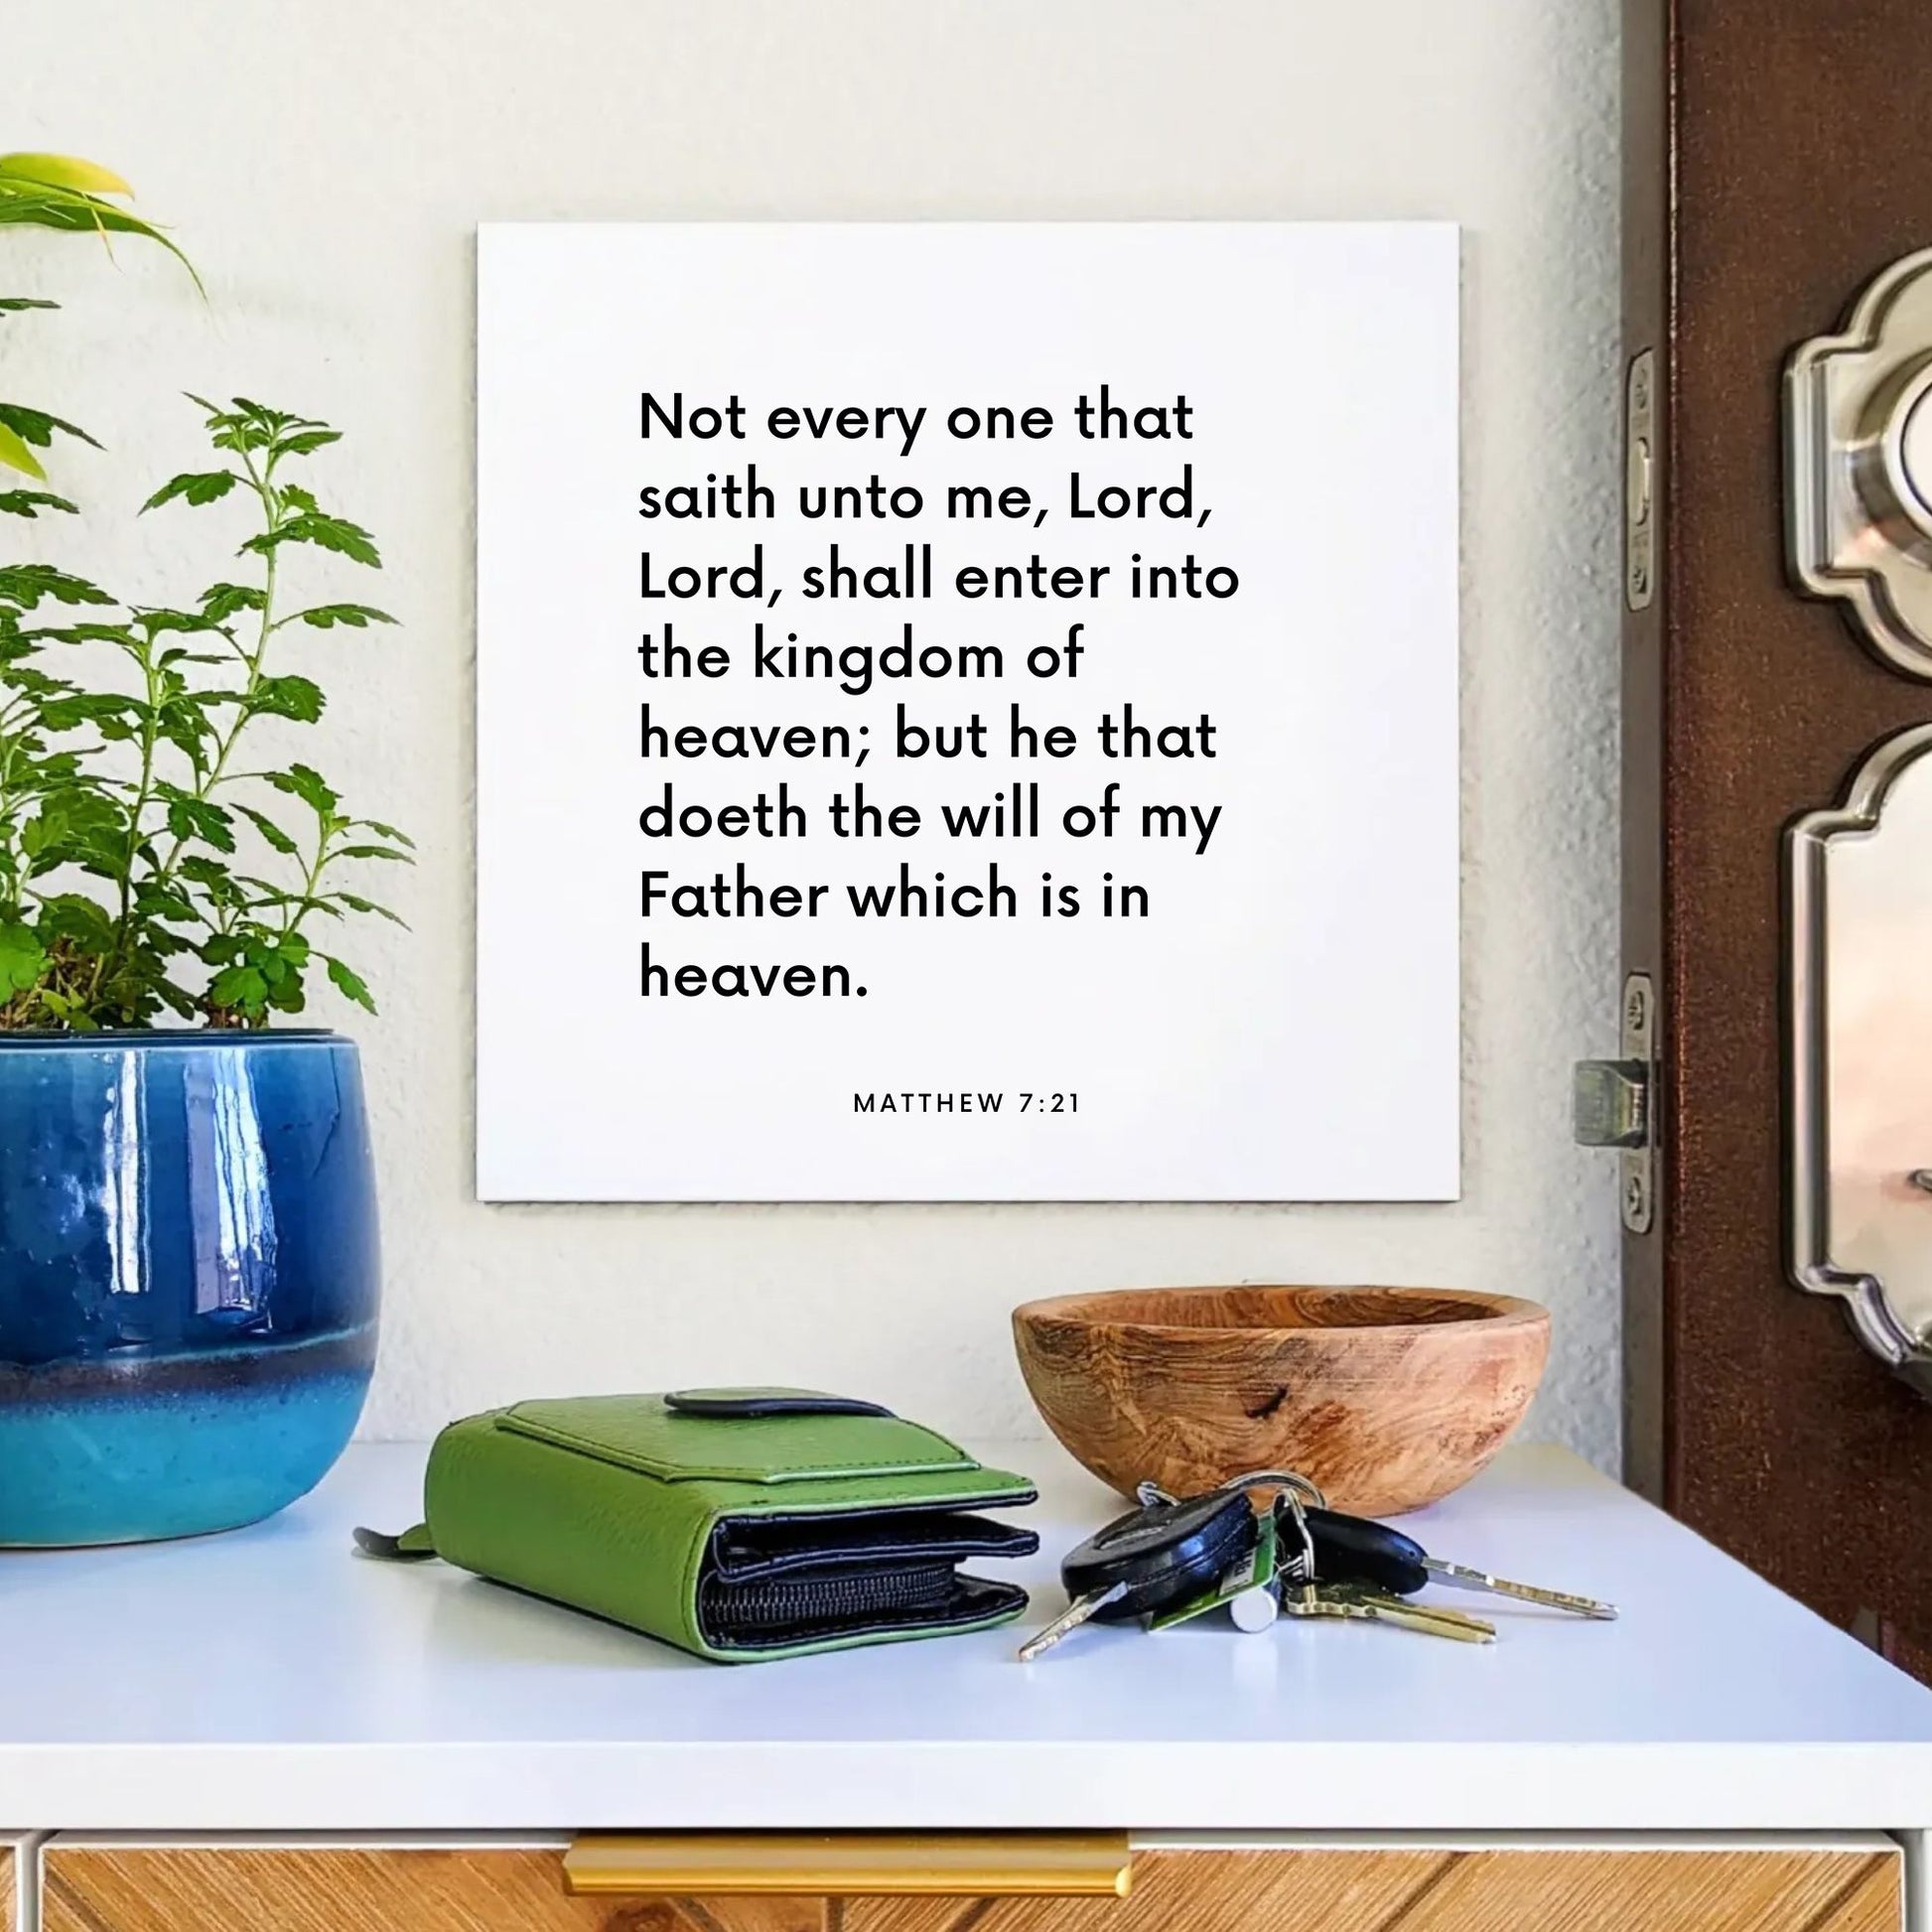 Entryway mouting of the scripture tile for Matthew 7:21 - "He that doeth the will of my Father which is in heaven"